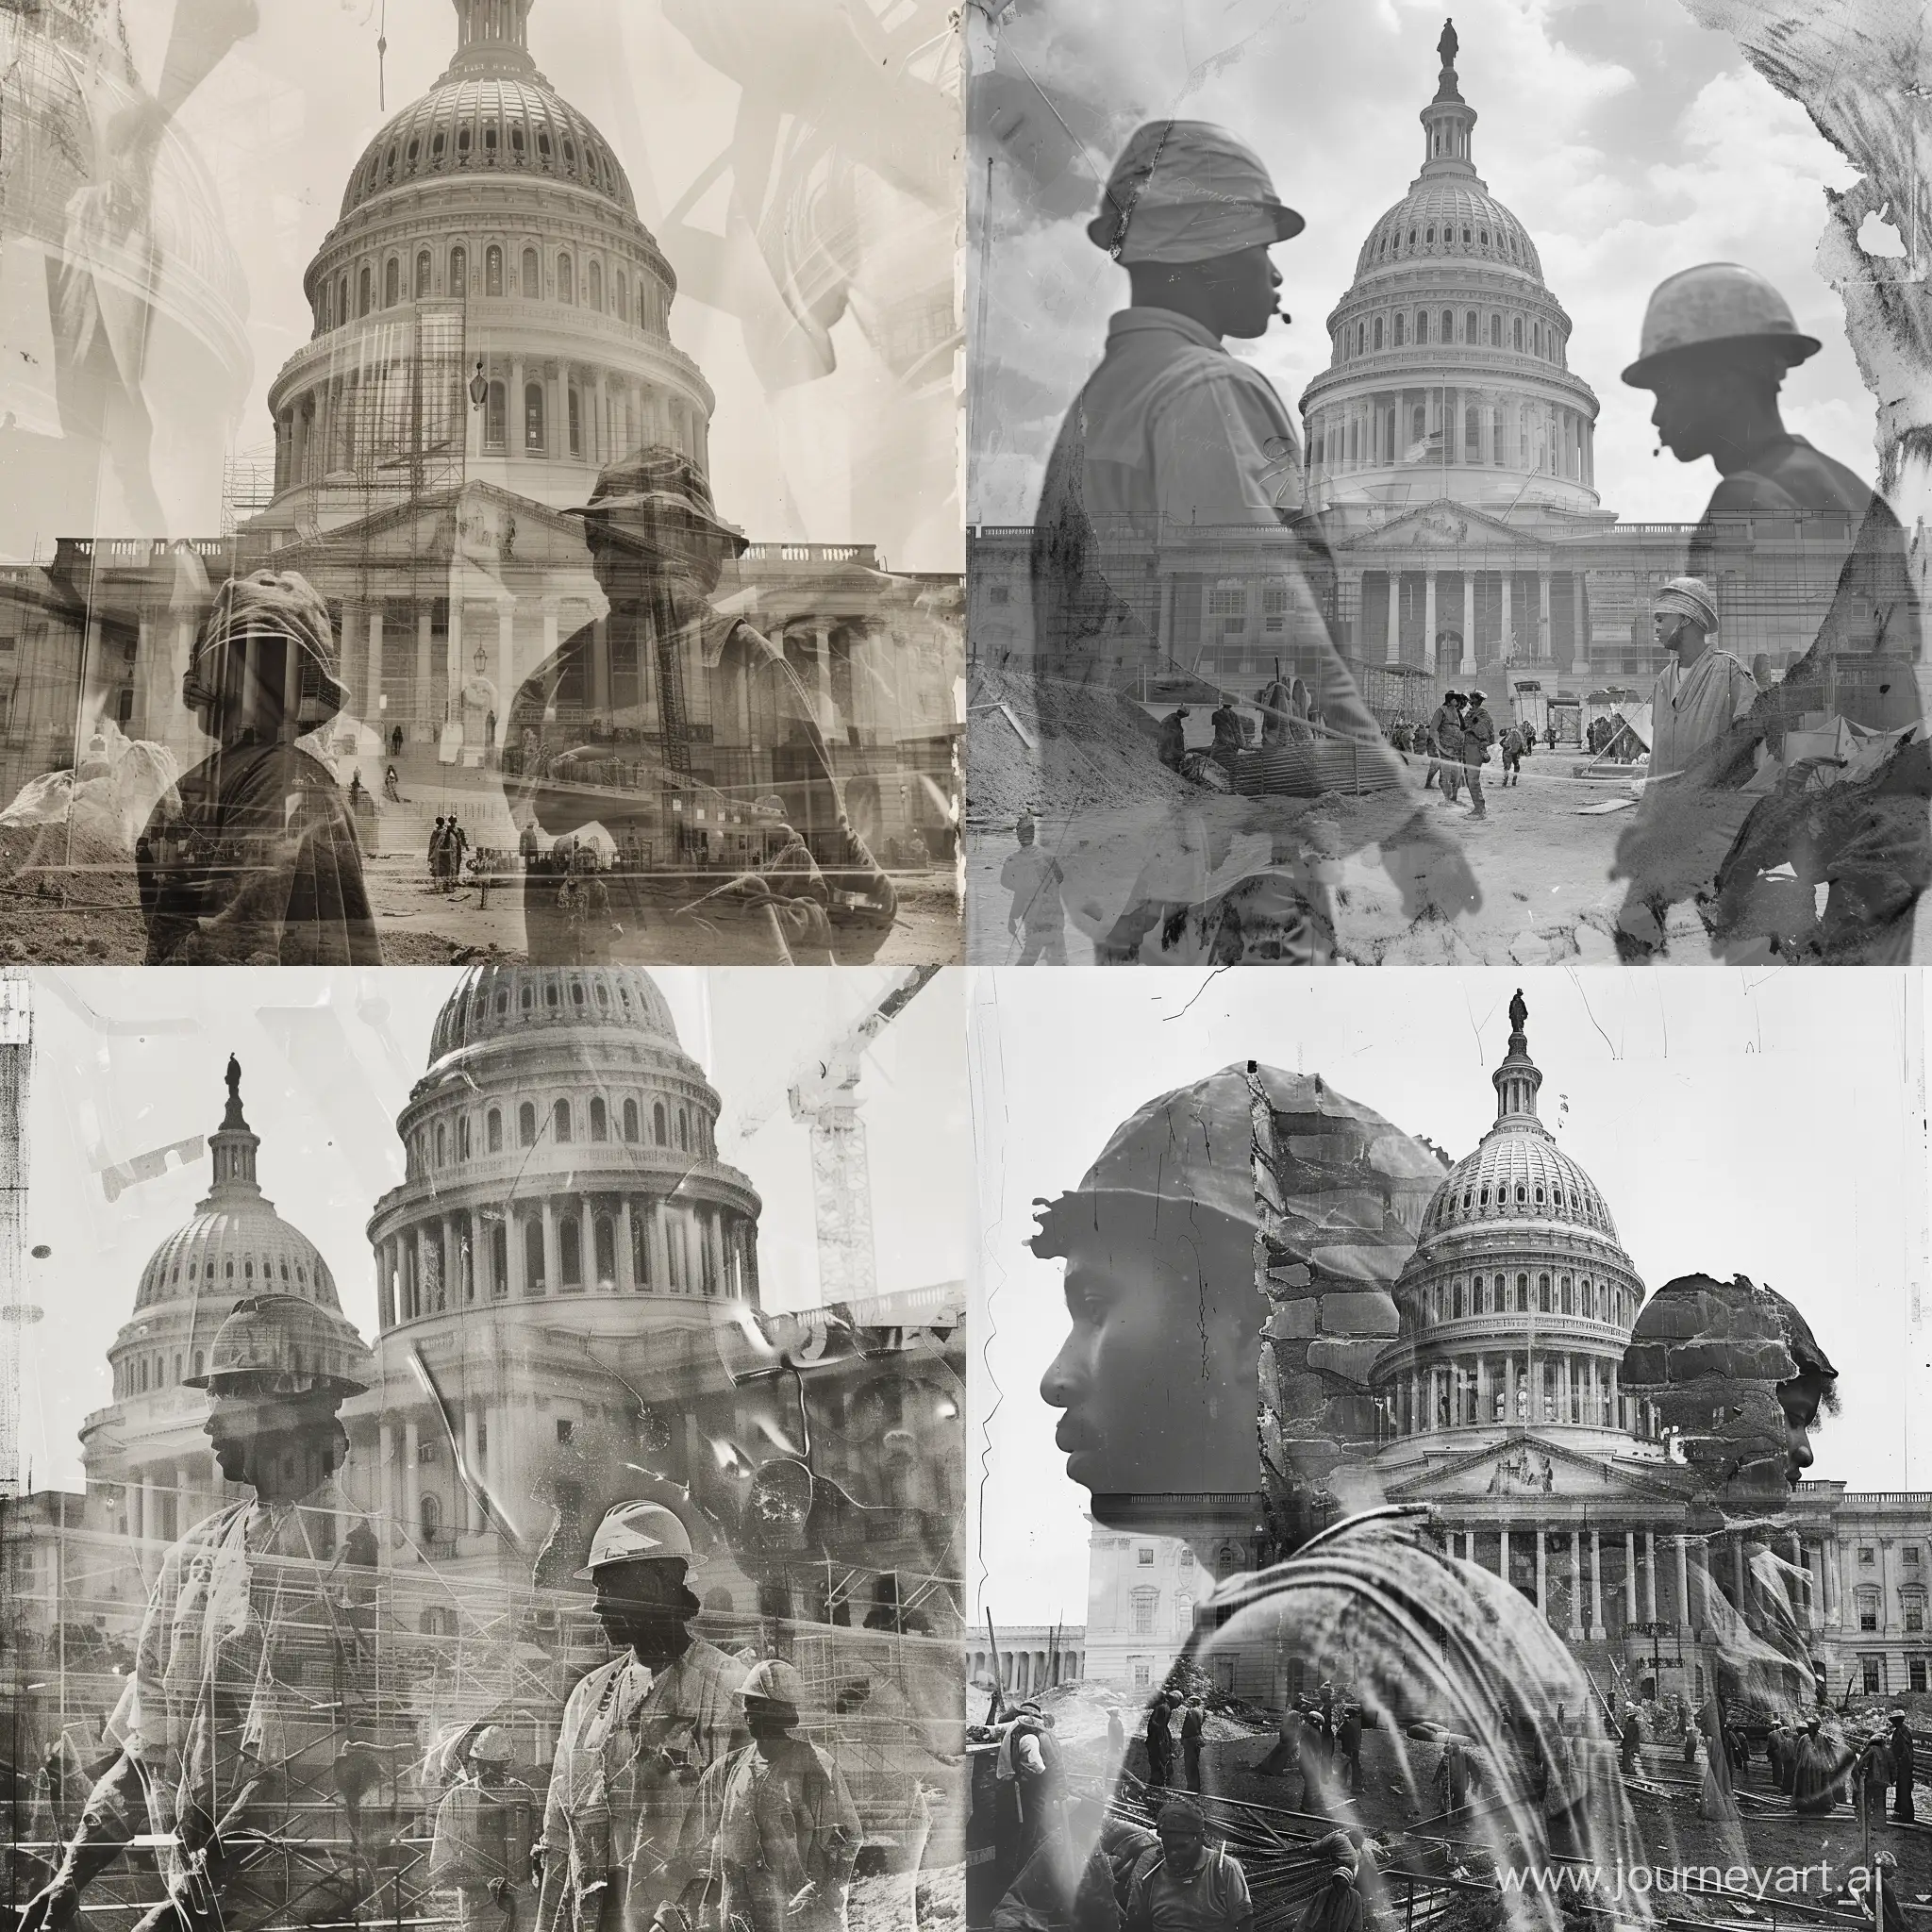 Double Exposure of the 17th century US Capitol building, under construction with African Americans laborers in old torn clothing